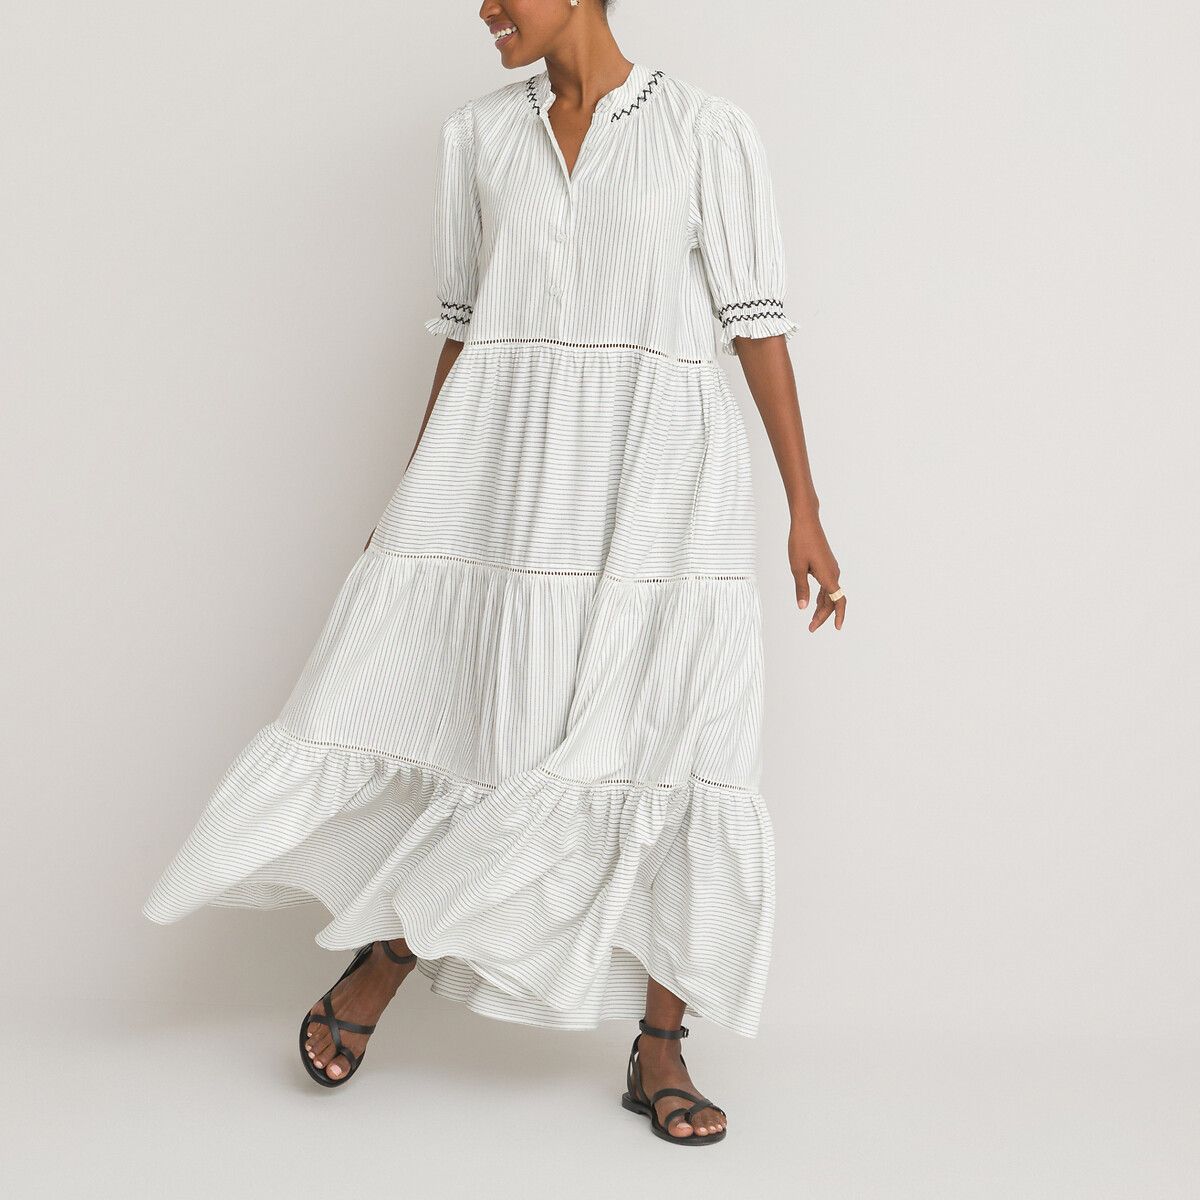 Organic Cotton Mix Dress in Striped Print with Puff Sleeves | La Redoute (UK)